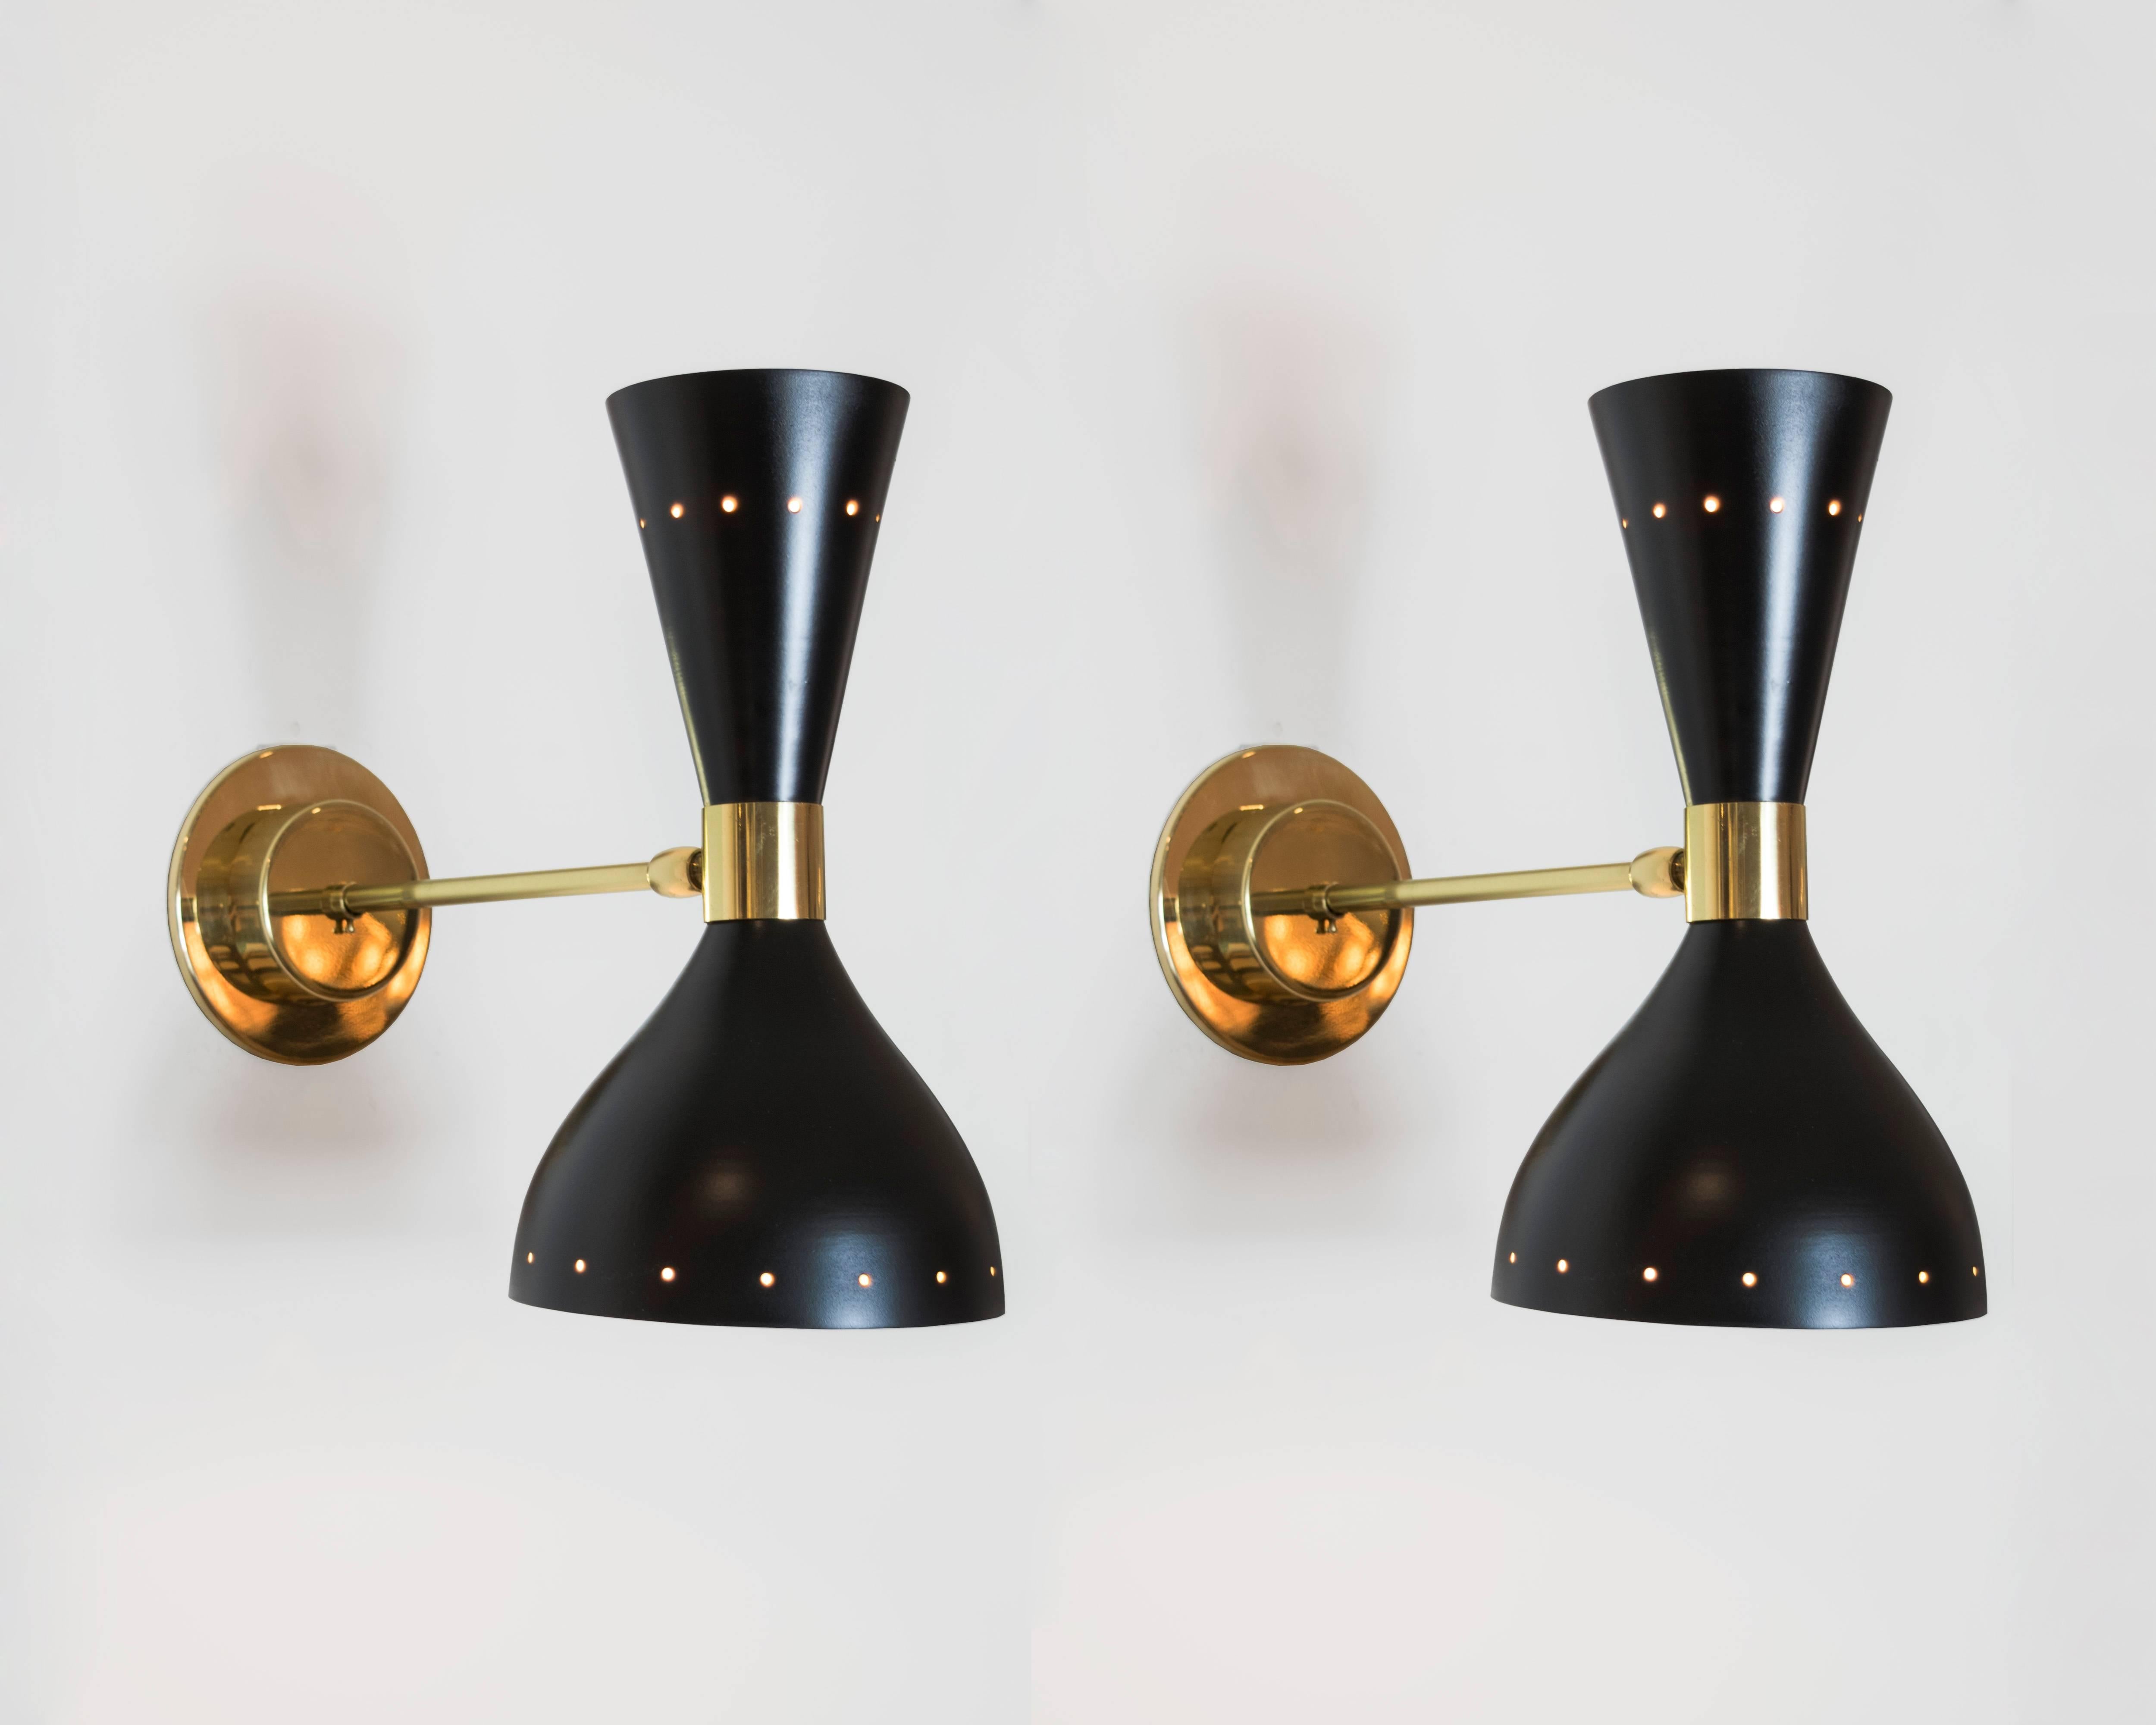 A pair of Stilnovo black lacquer and brass sconces with both up and down lighting in a conical shape. The outer rim extends 11.5 inches from the wall and the upper cone has a ring of perforated circles to add more drama to the pair. (A white pair is